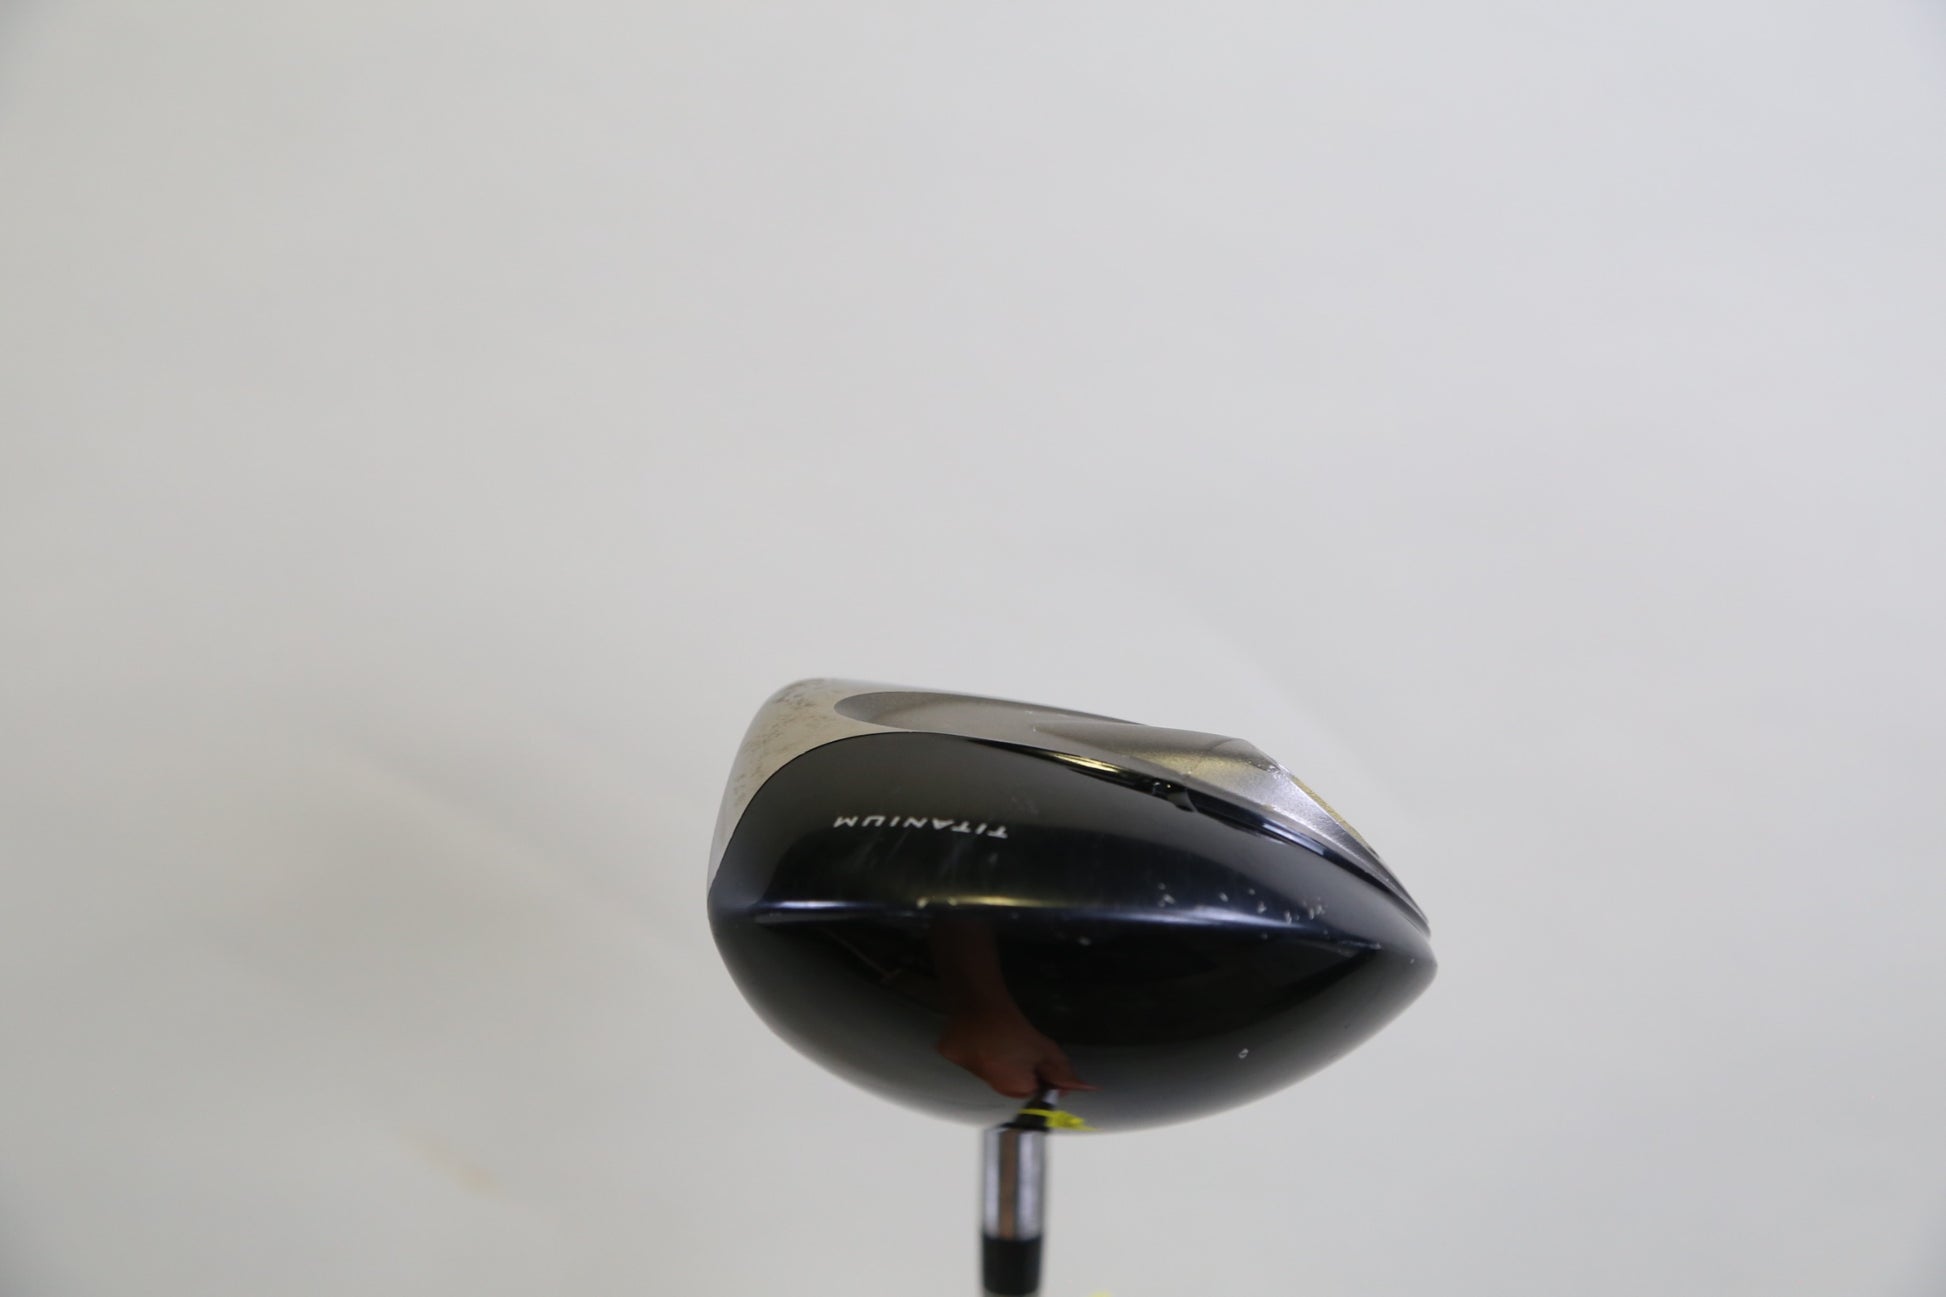 Used TaylorMade r5 dual Driver - Right-Handed - 10.5 Degrees - Regular Flex-Next Round